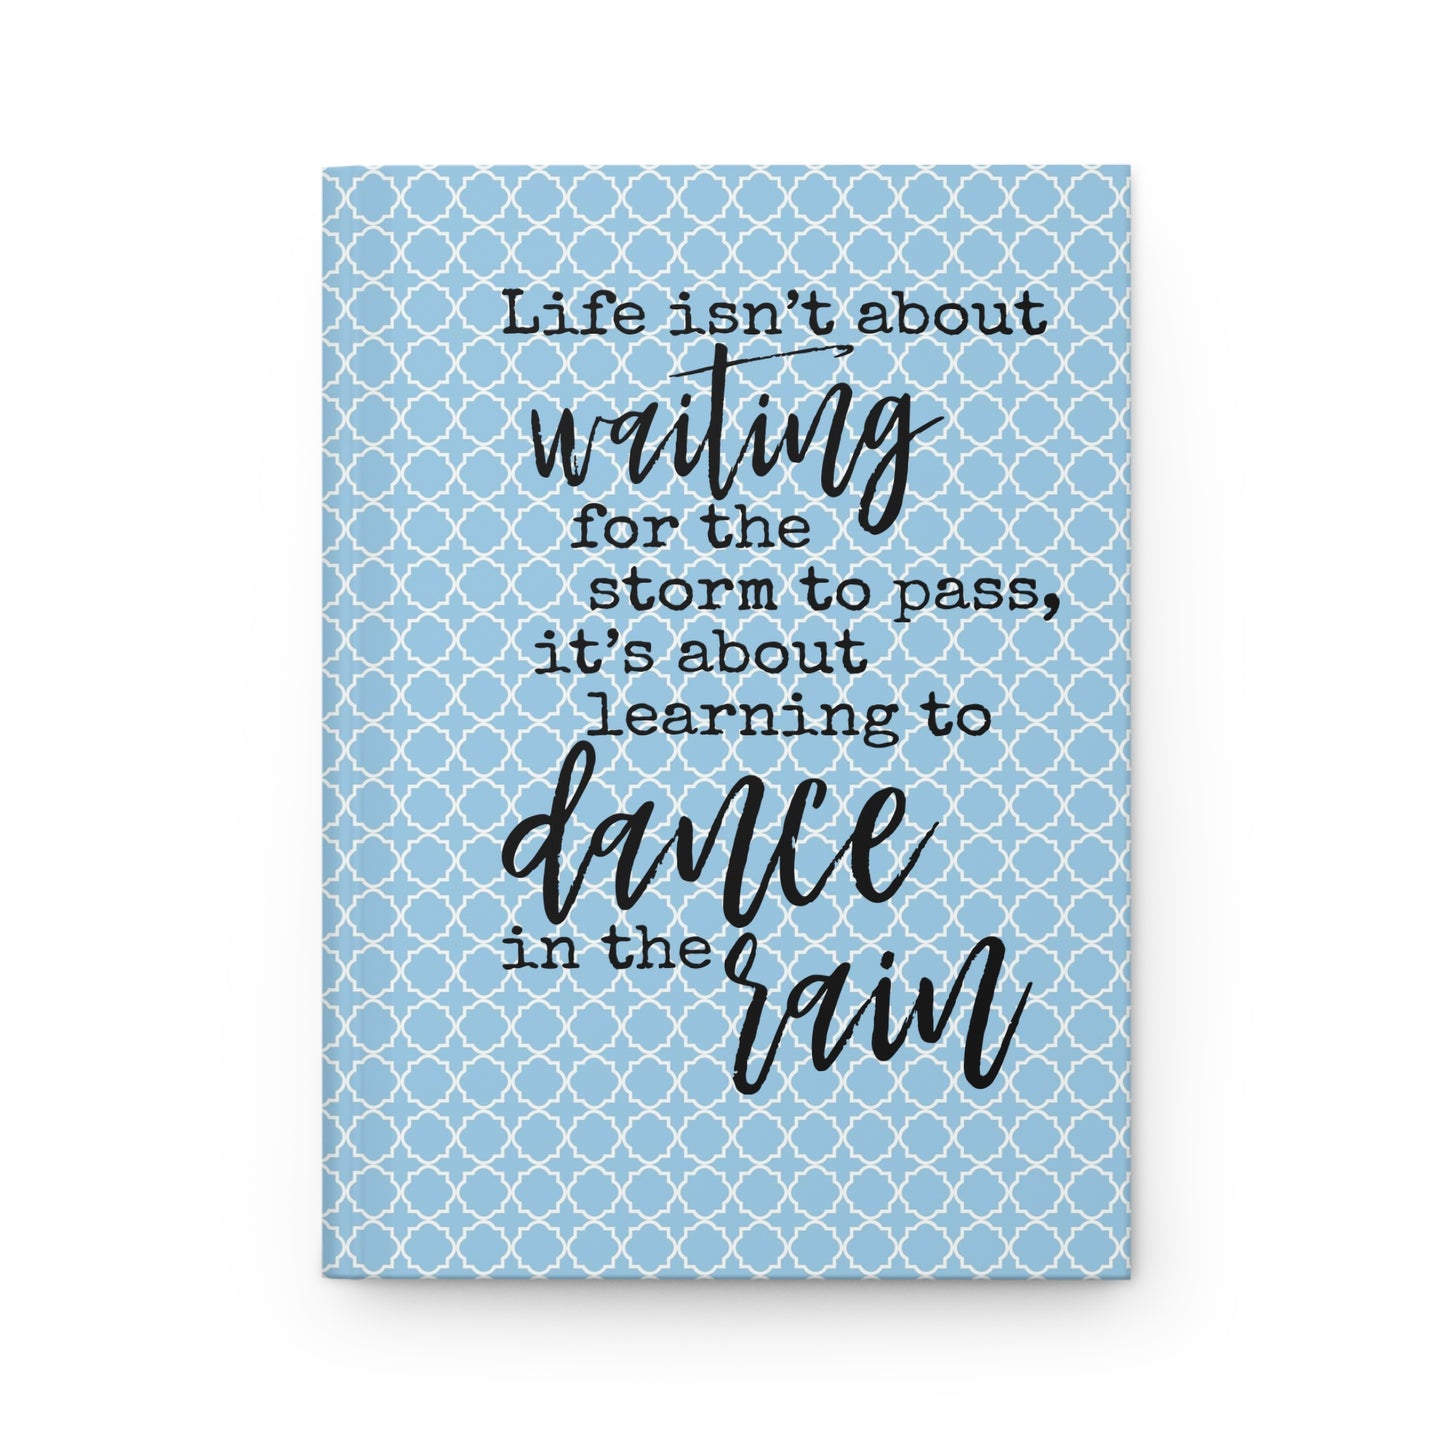 Life isn't about waiting for the storm to pass... - Light Blue 1 - Hardcover Journal Matte